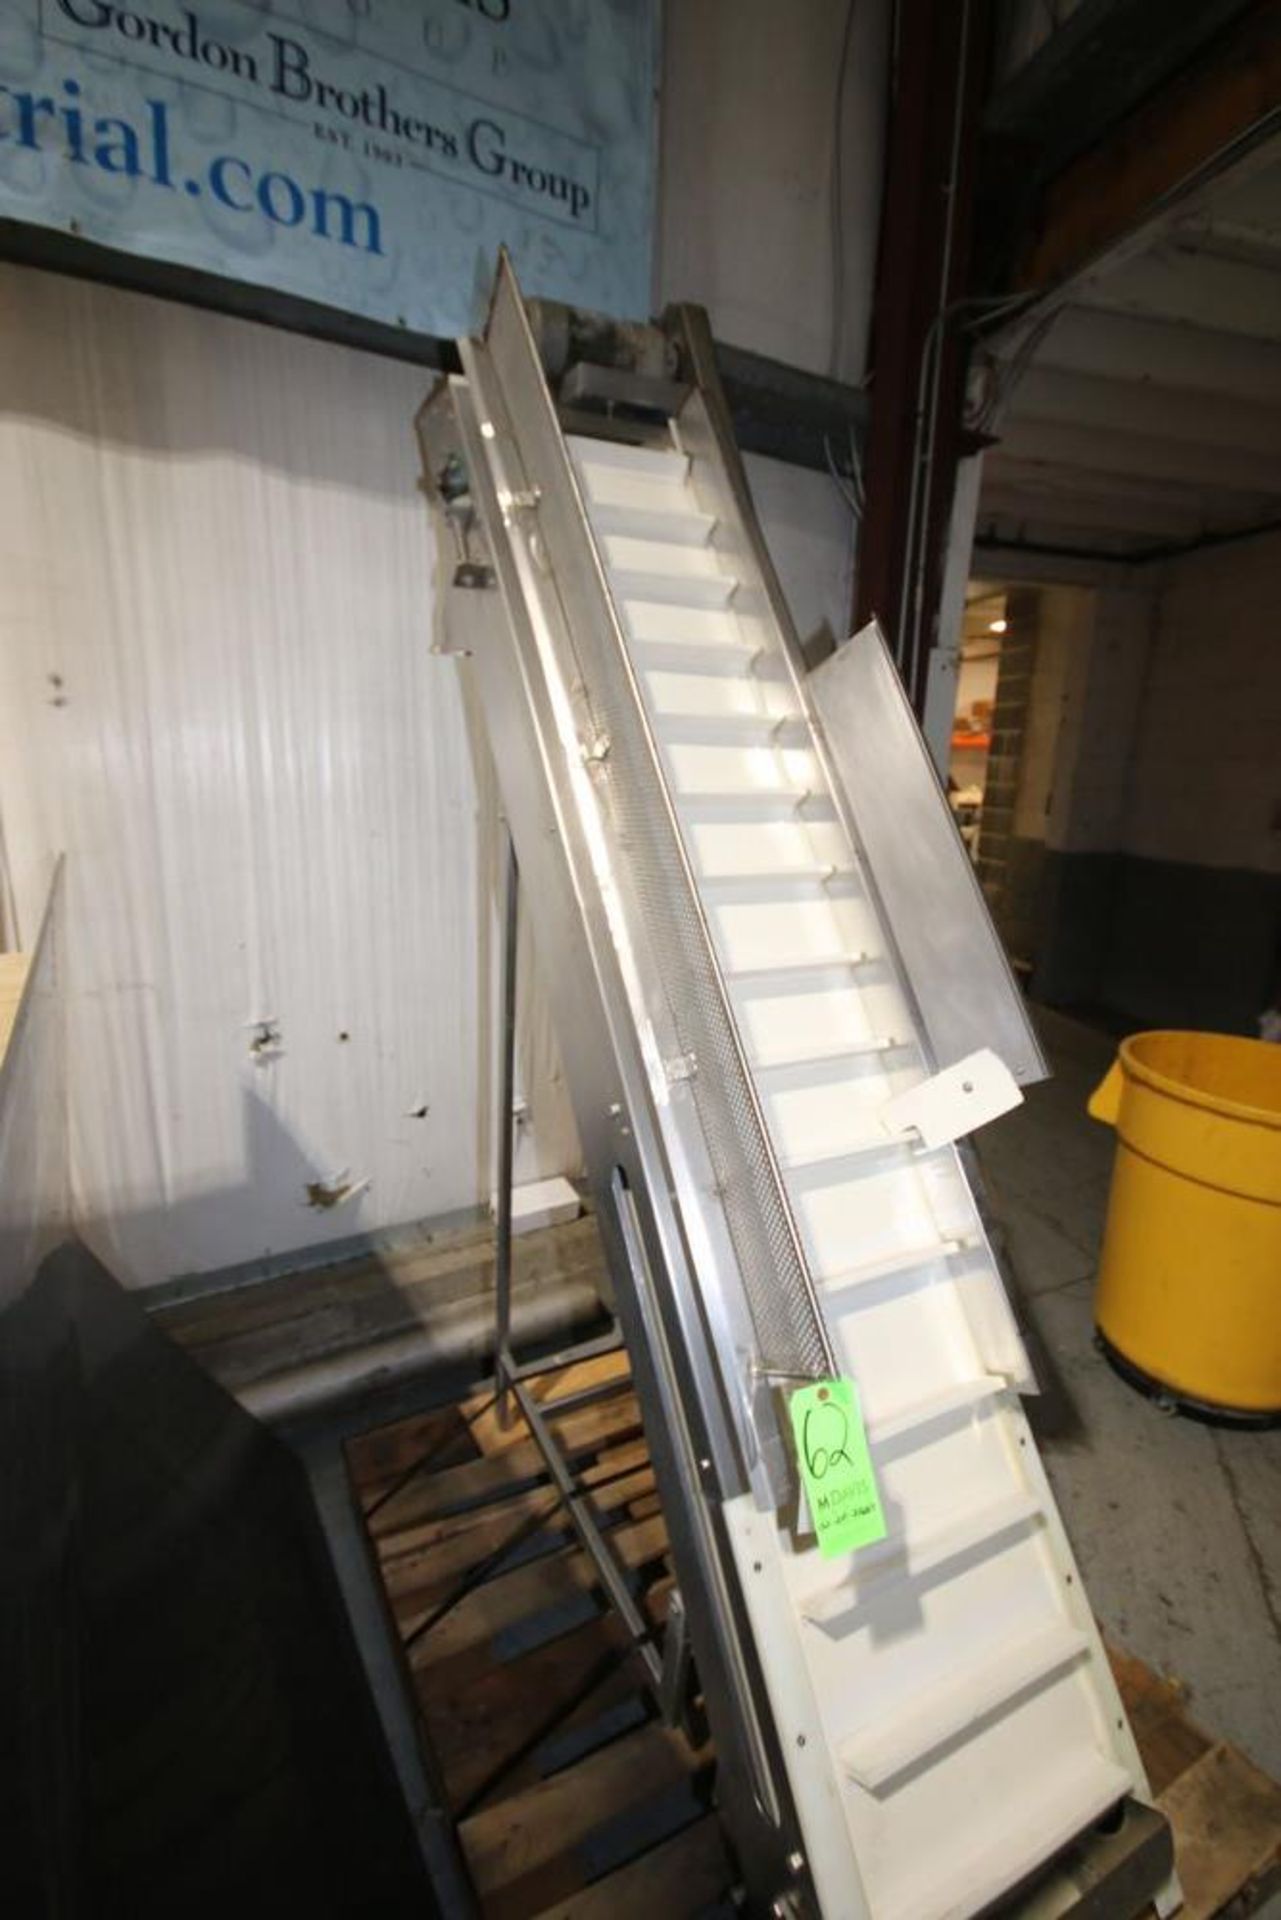 S/S Incline Conveyor with Cleats, Cleat Spacing: Aprox. 6", Overall Dims.: Aprox. 88" L x 16" W, - Image 5 of 6